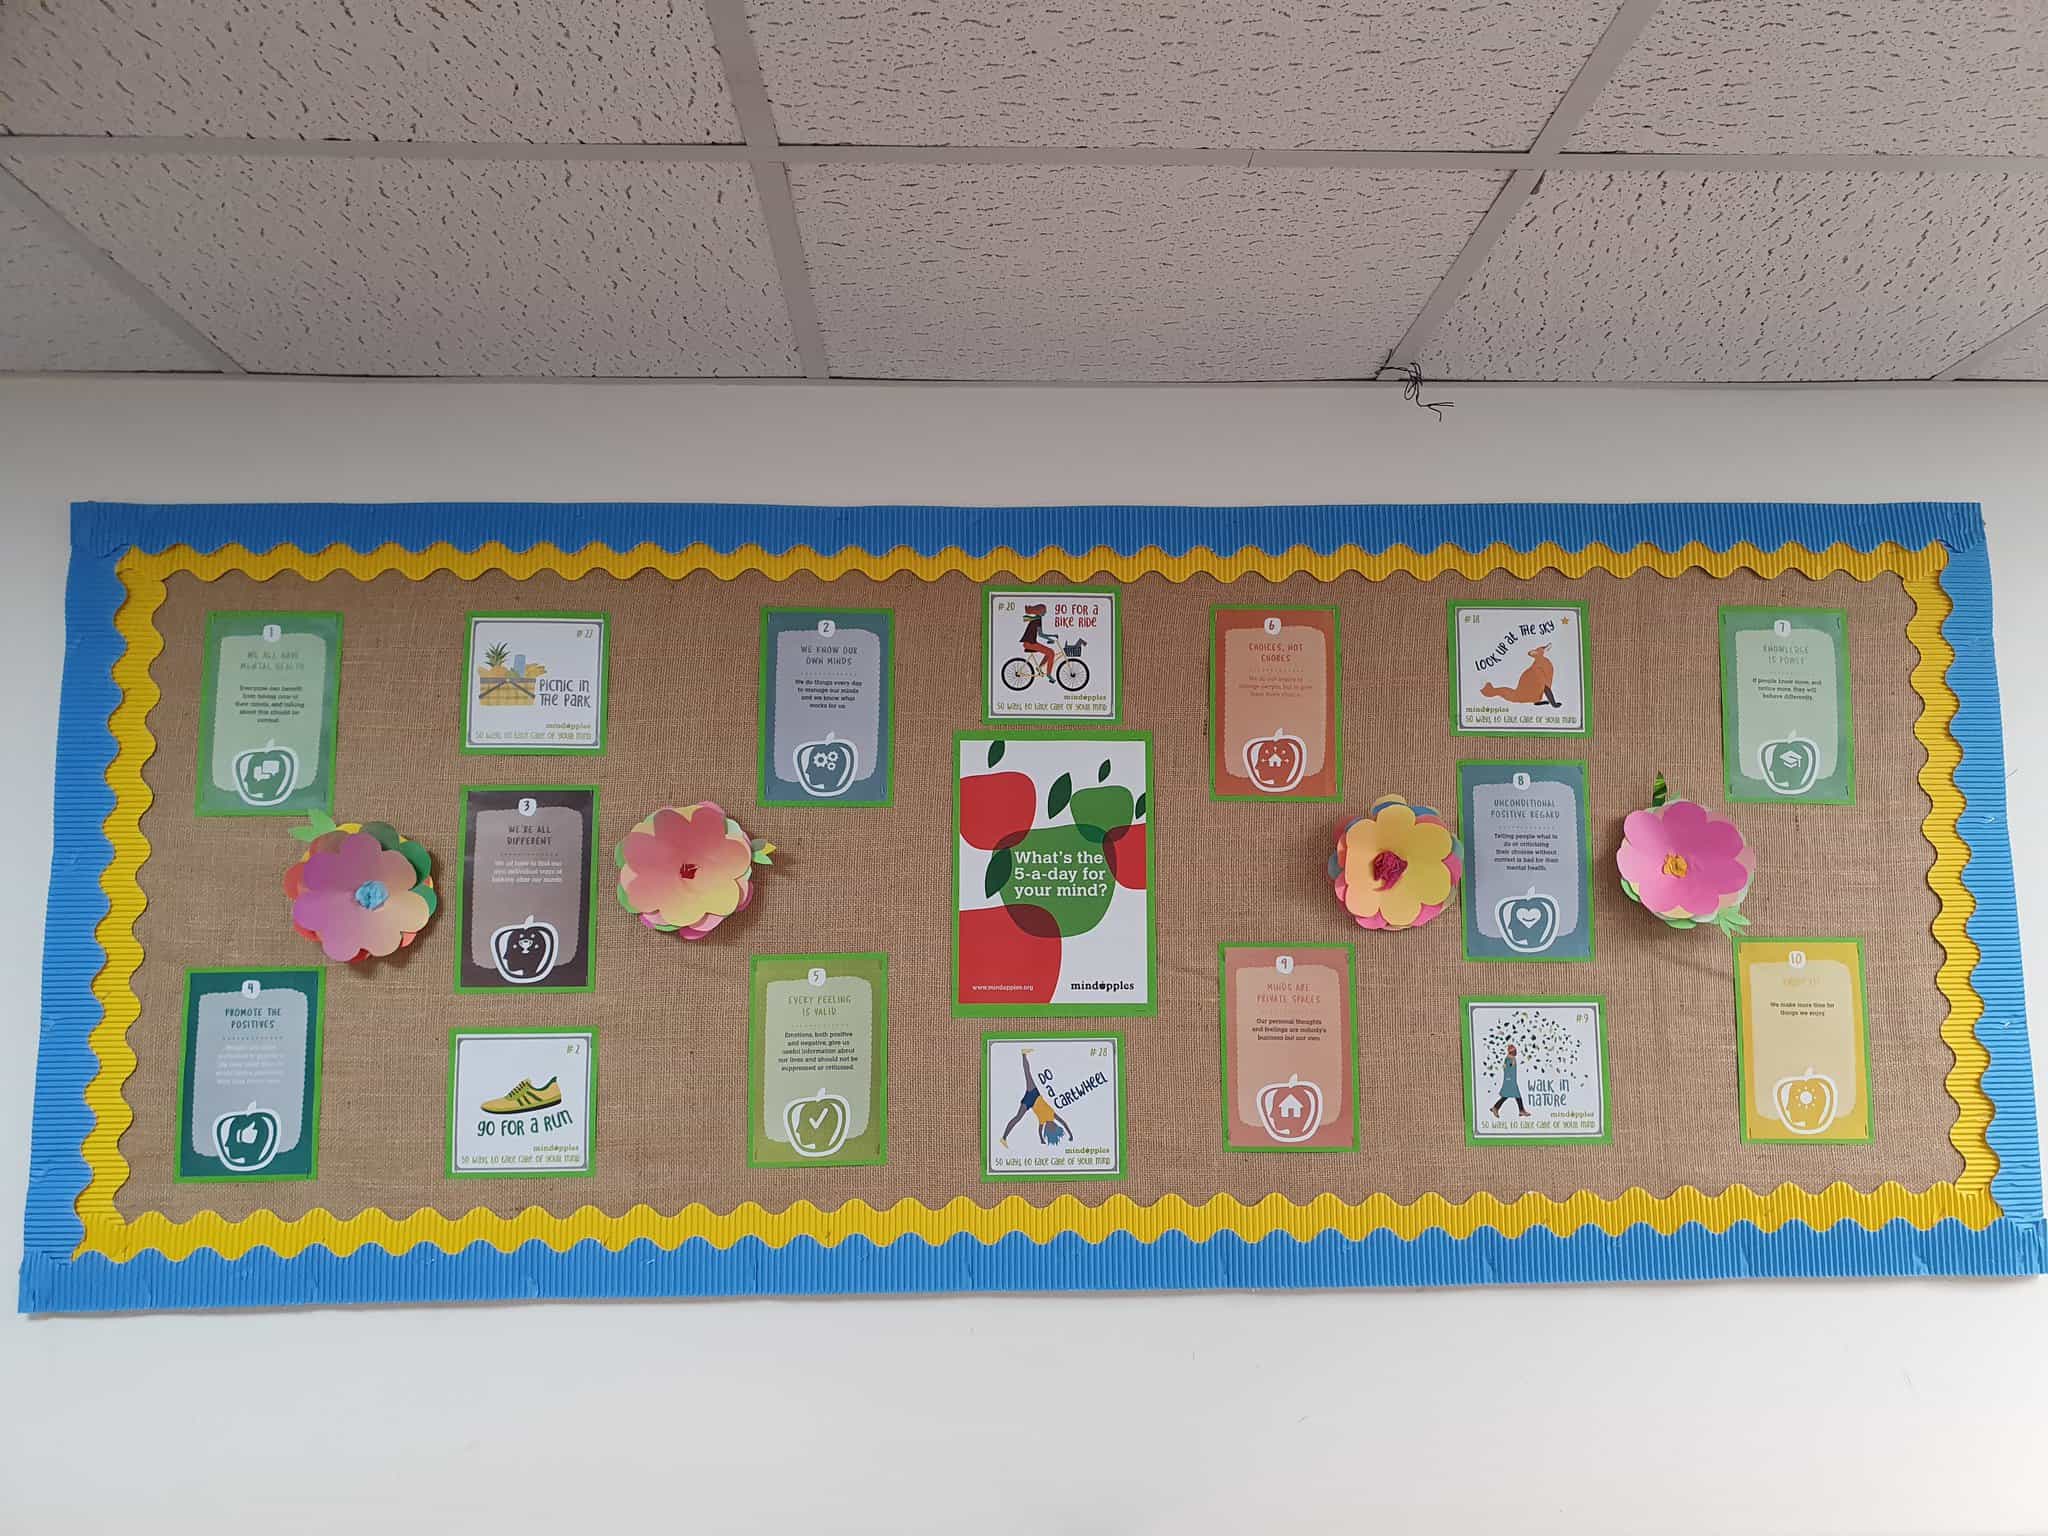 School noticeboard featuring Mindapples principles for wellbeing and some of the 50 ways images